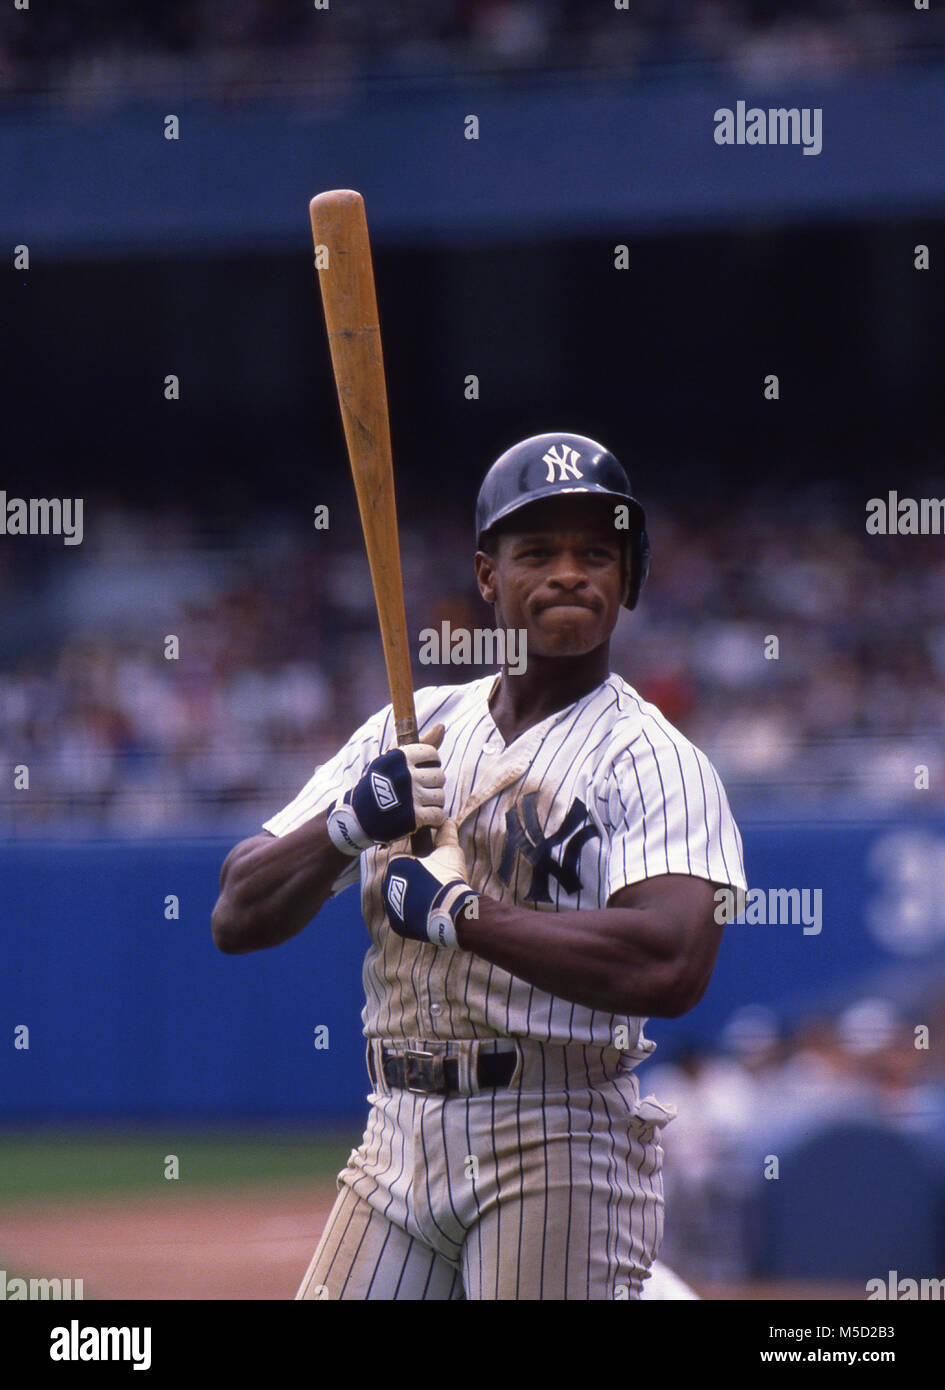 Rickey Henderson as a New York Yankee in the late 1980's Stock Photo - Alamy